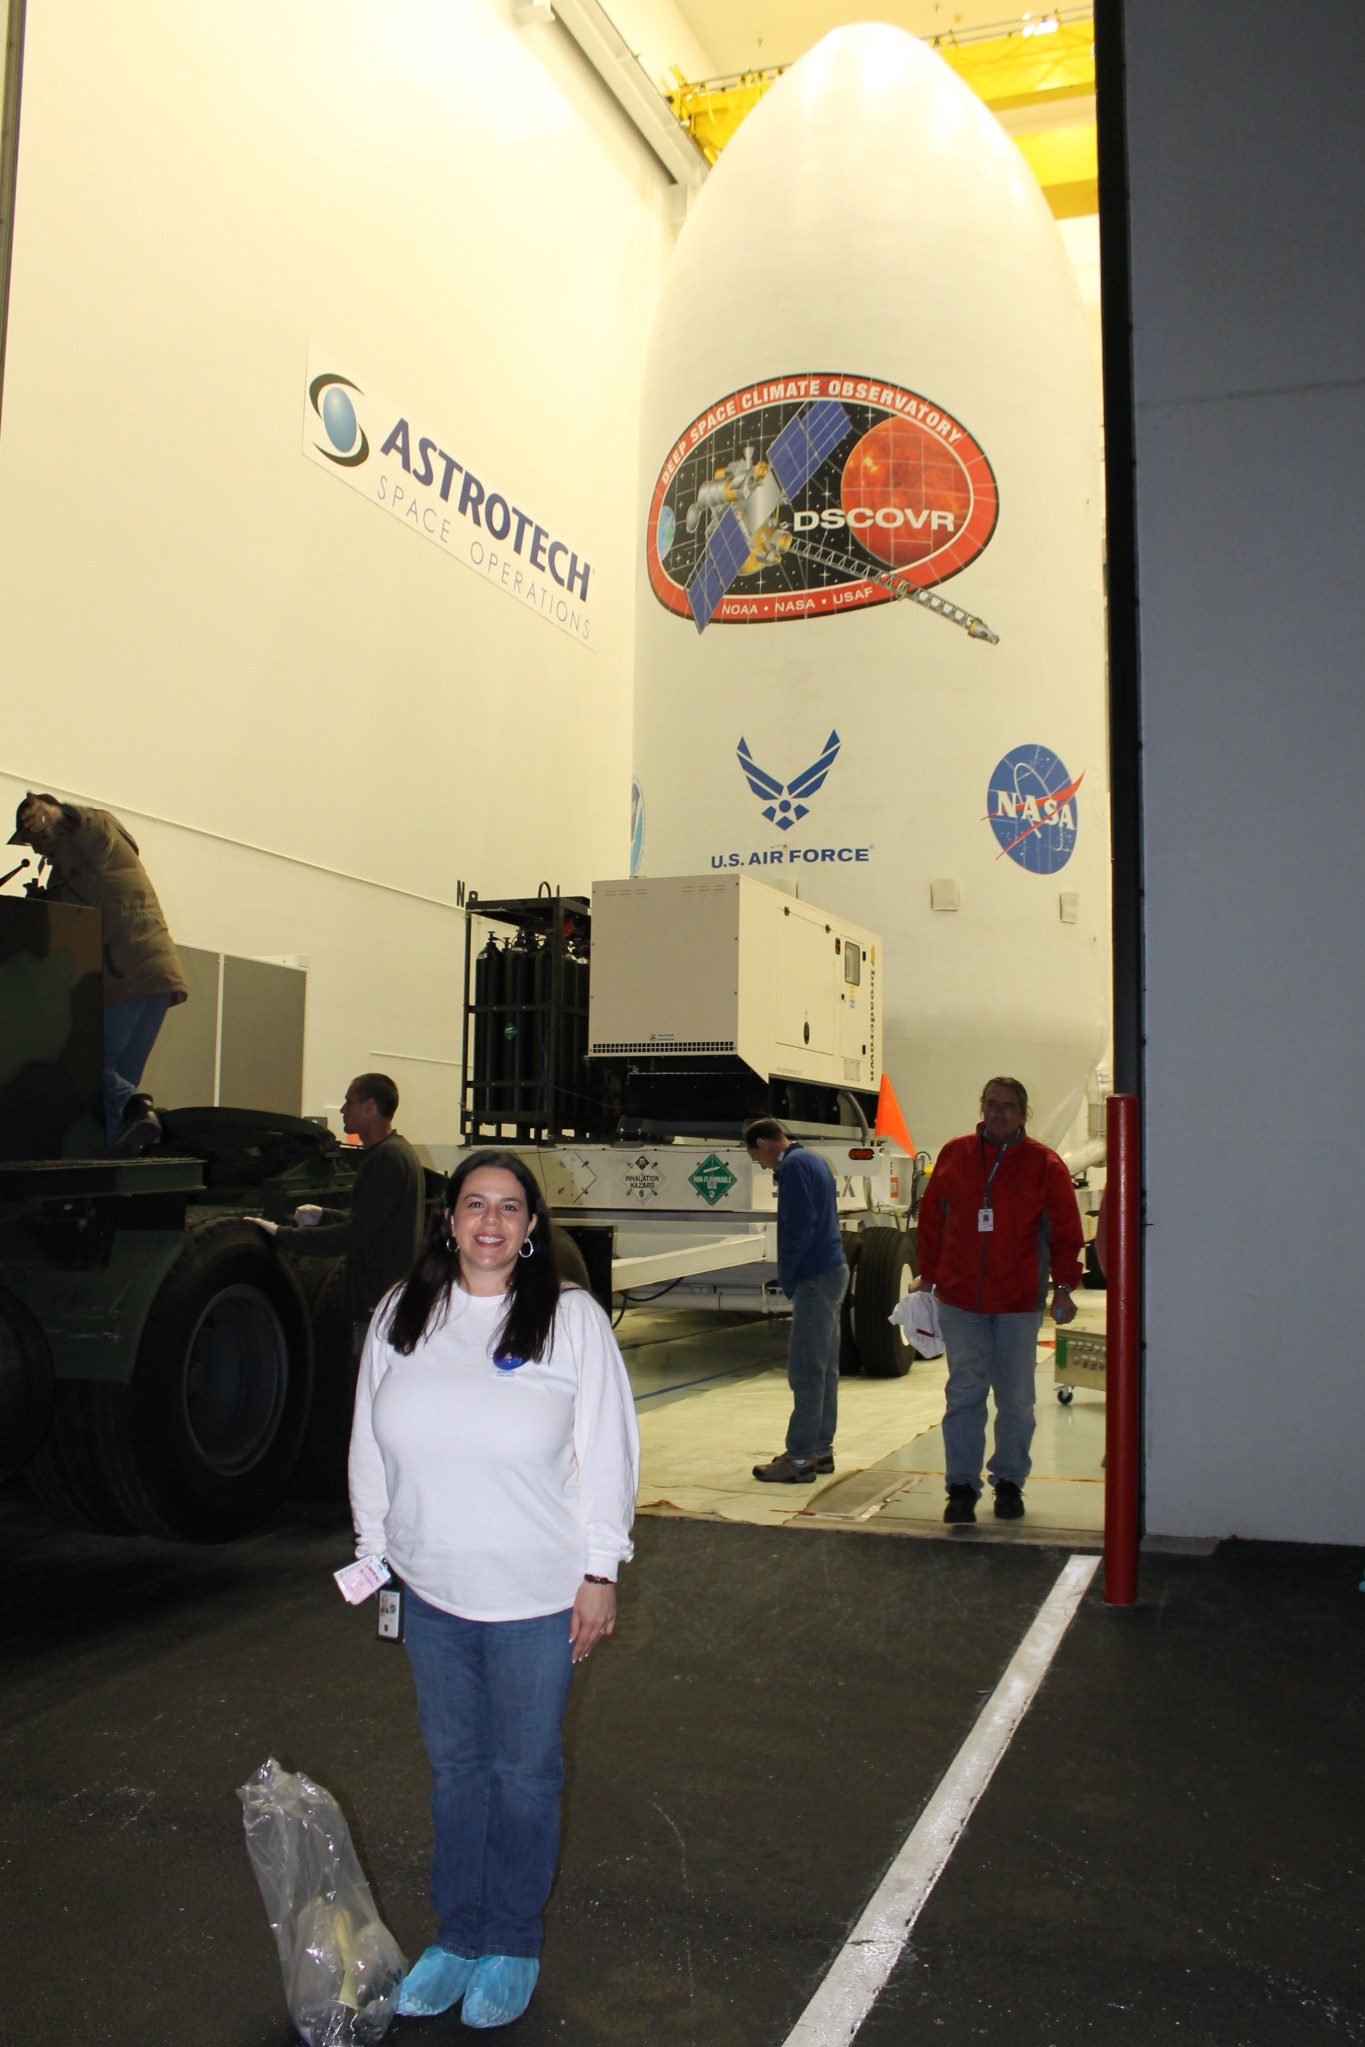 Woman with light tan skin and shoulder length black hair wears  a white long sleeve t shirt, jeans, blue sterile shoe covers and silver hoop earrings. She stands in front of a large rocket with a satellite logo that says "DSCOVR" "Deep Space Climate Observatory" "NOAA NASA USAF" The rocket is on a vehicle to move it and there are four men in the background. 